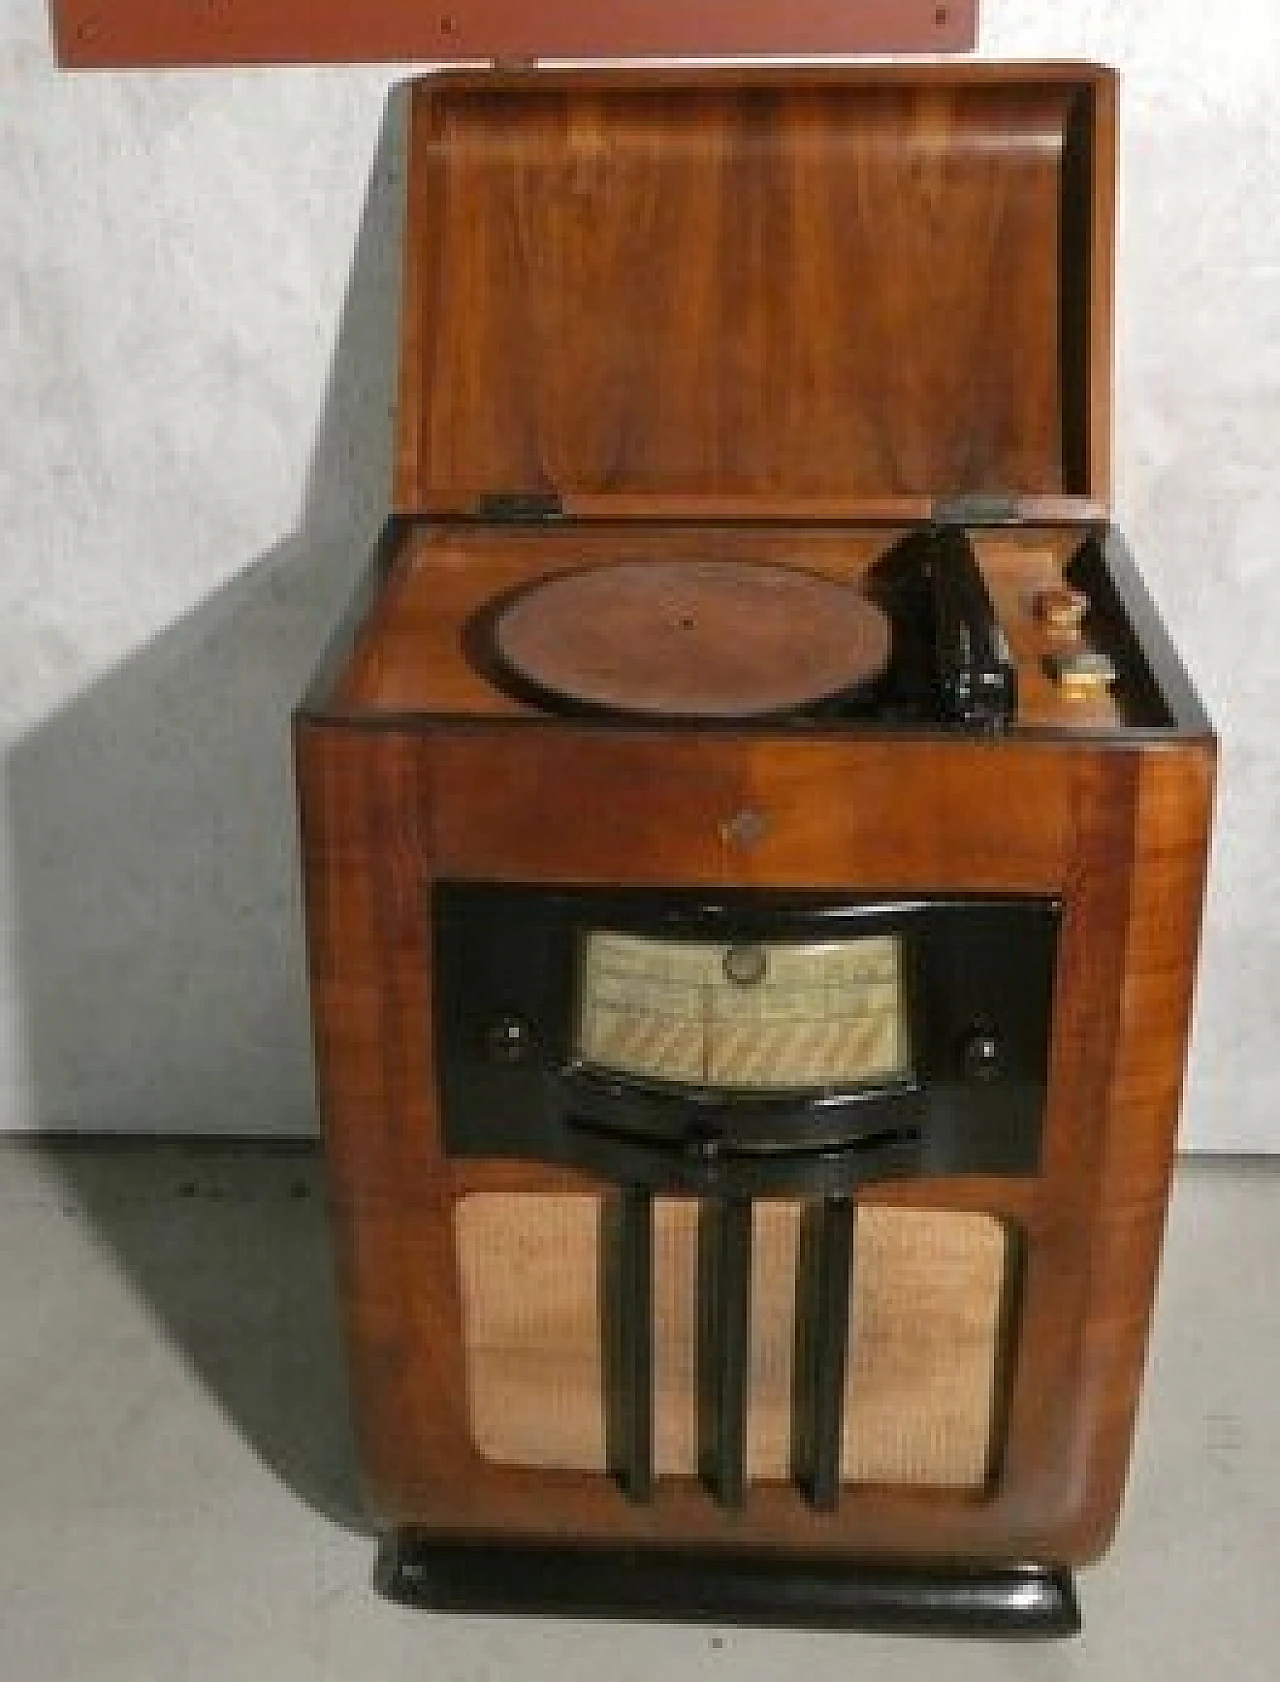 Marconi 1562 radio cabinet with turntable by Compagnia Marconi, 1940 30